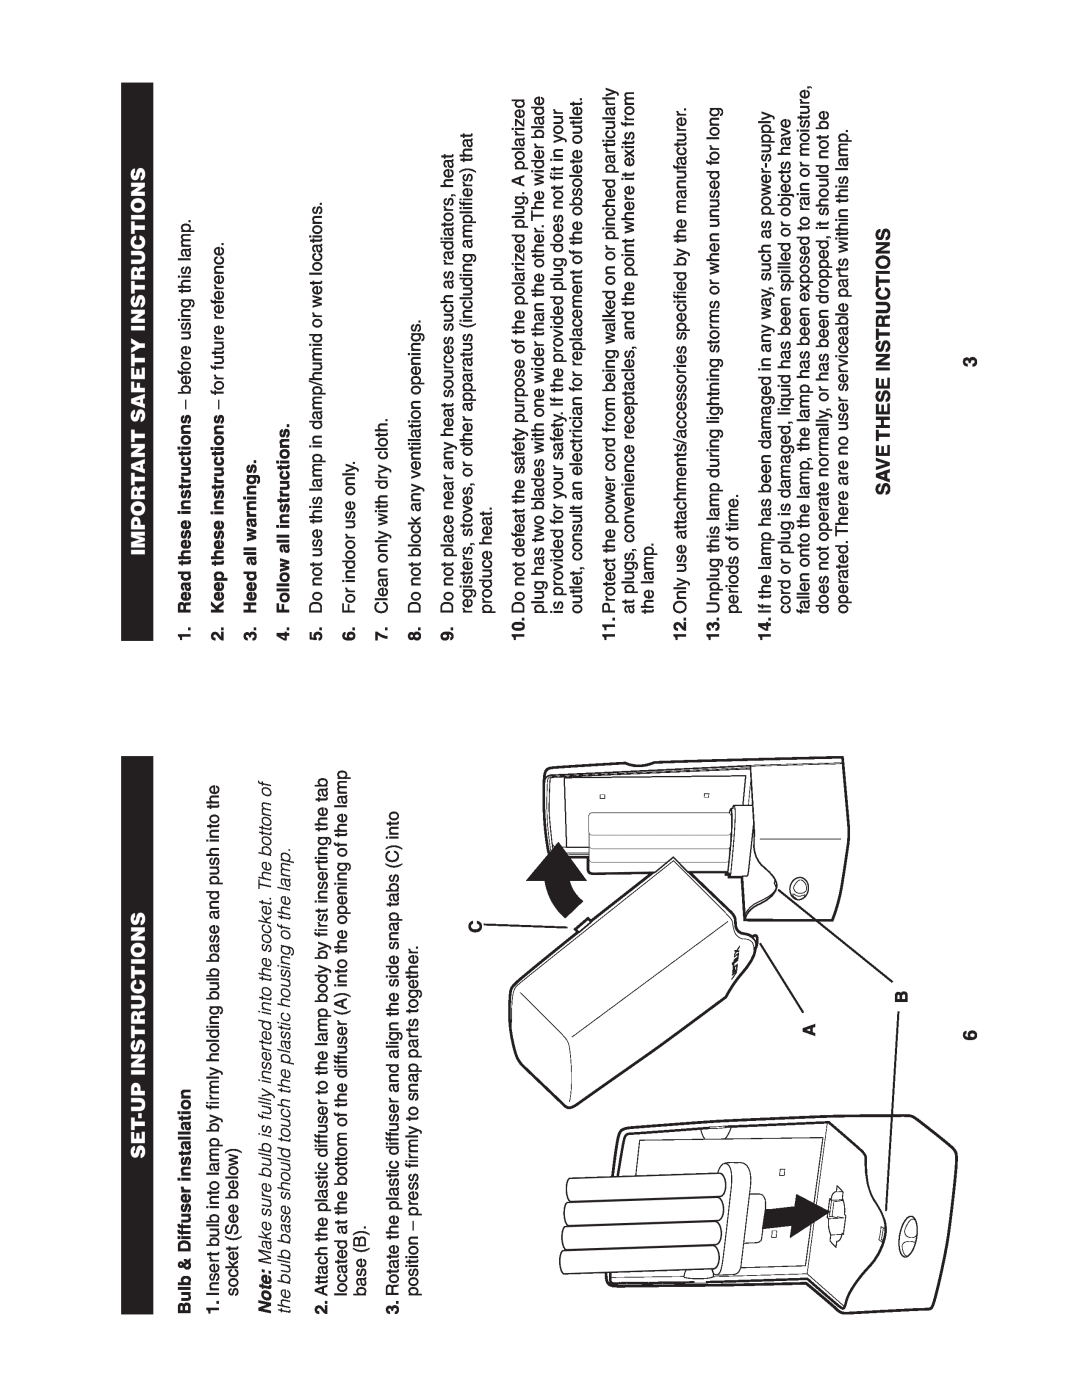 Verilux VT01 Set-Upinstructions, Save These Instructions, Important Safety Instructions, Bulb & Diffuser installation 